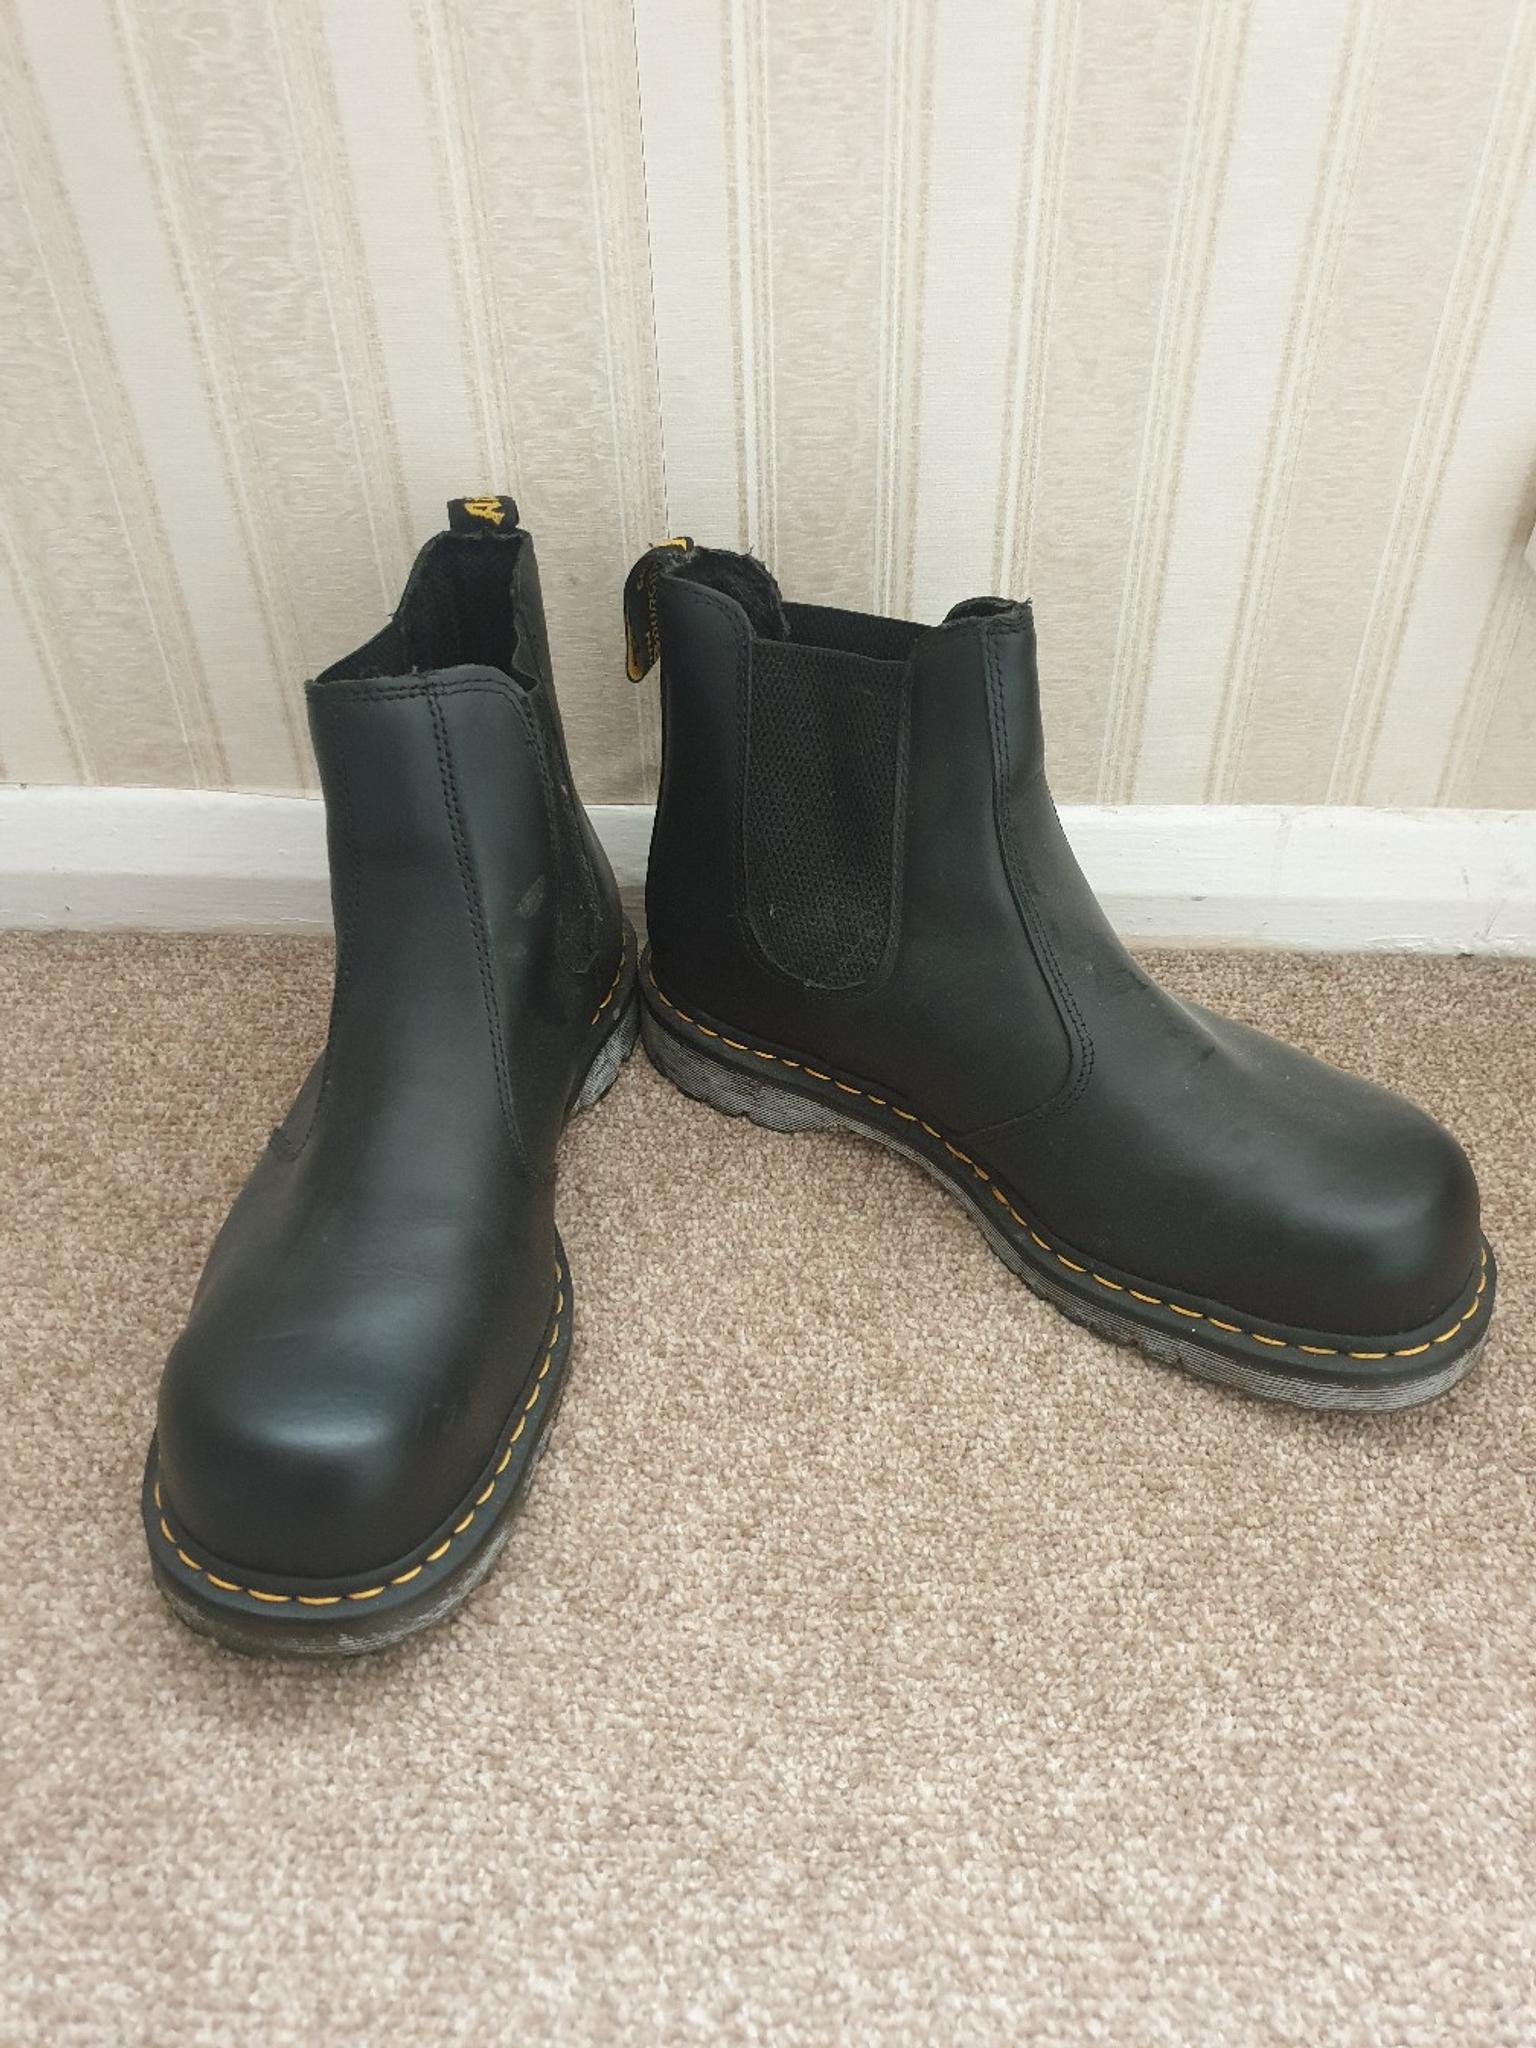 mens work boots size 10